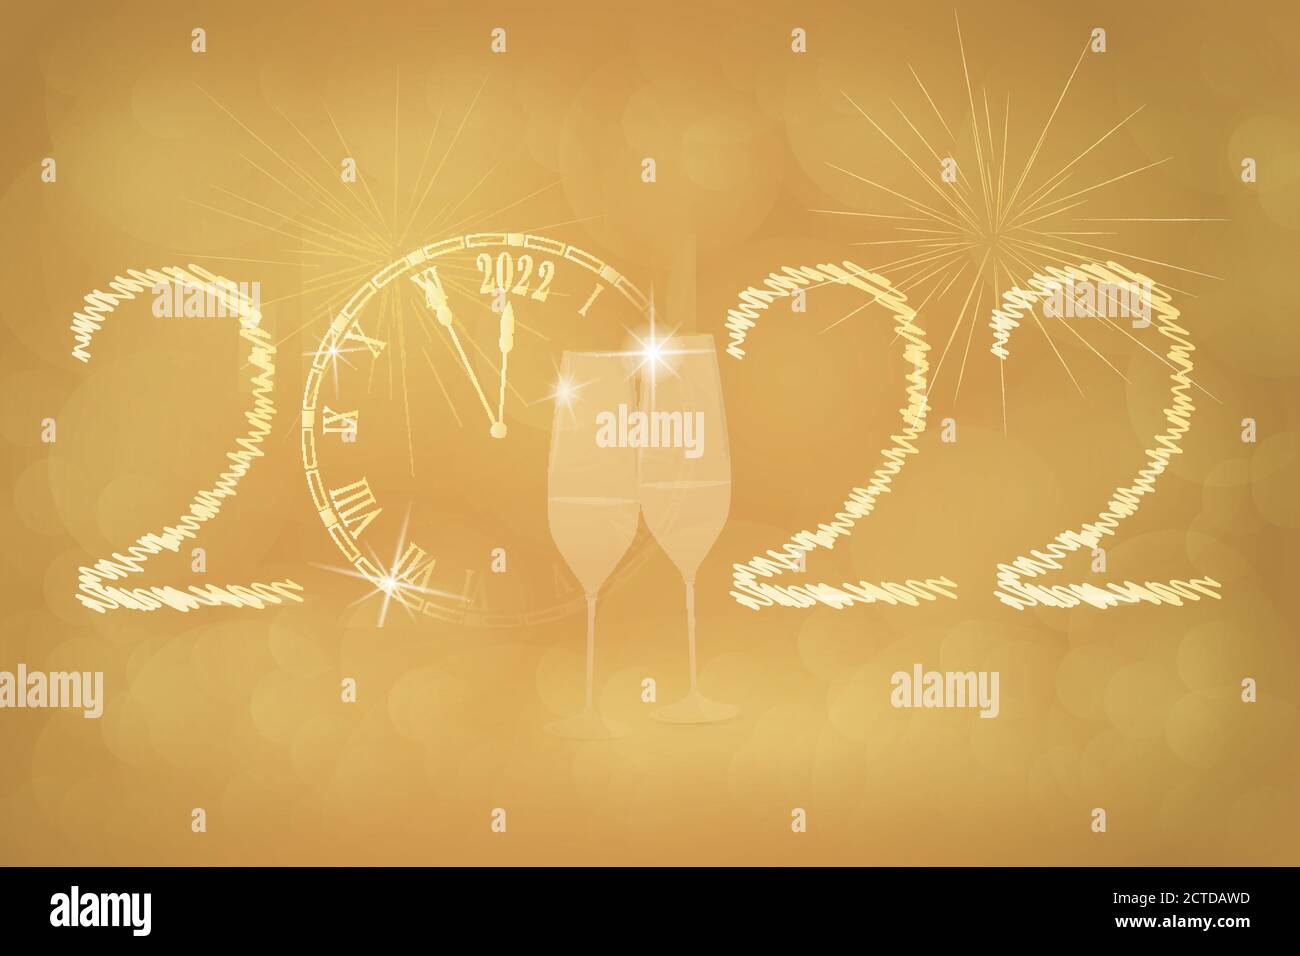 Happy New Year - 2022. Two glasses with big retro clock and fireworks in golden colors. Stock Vector